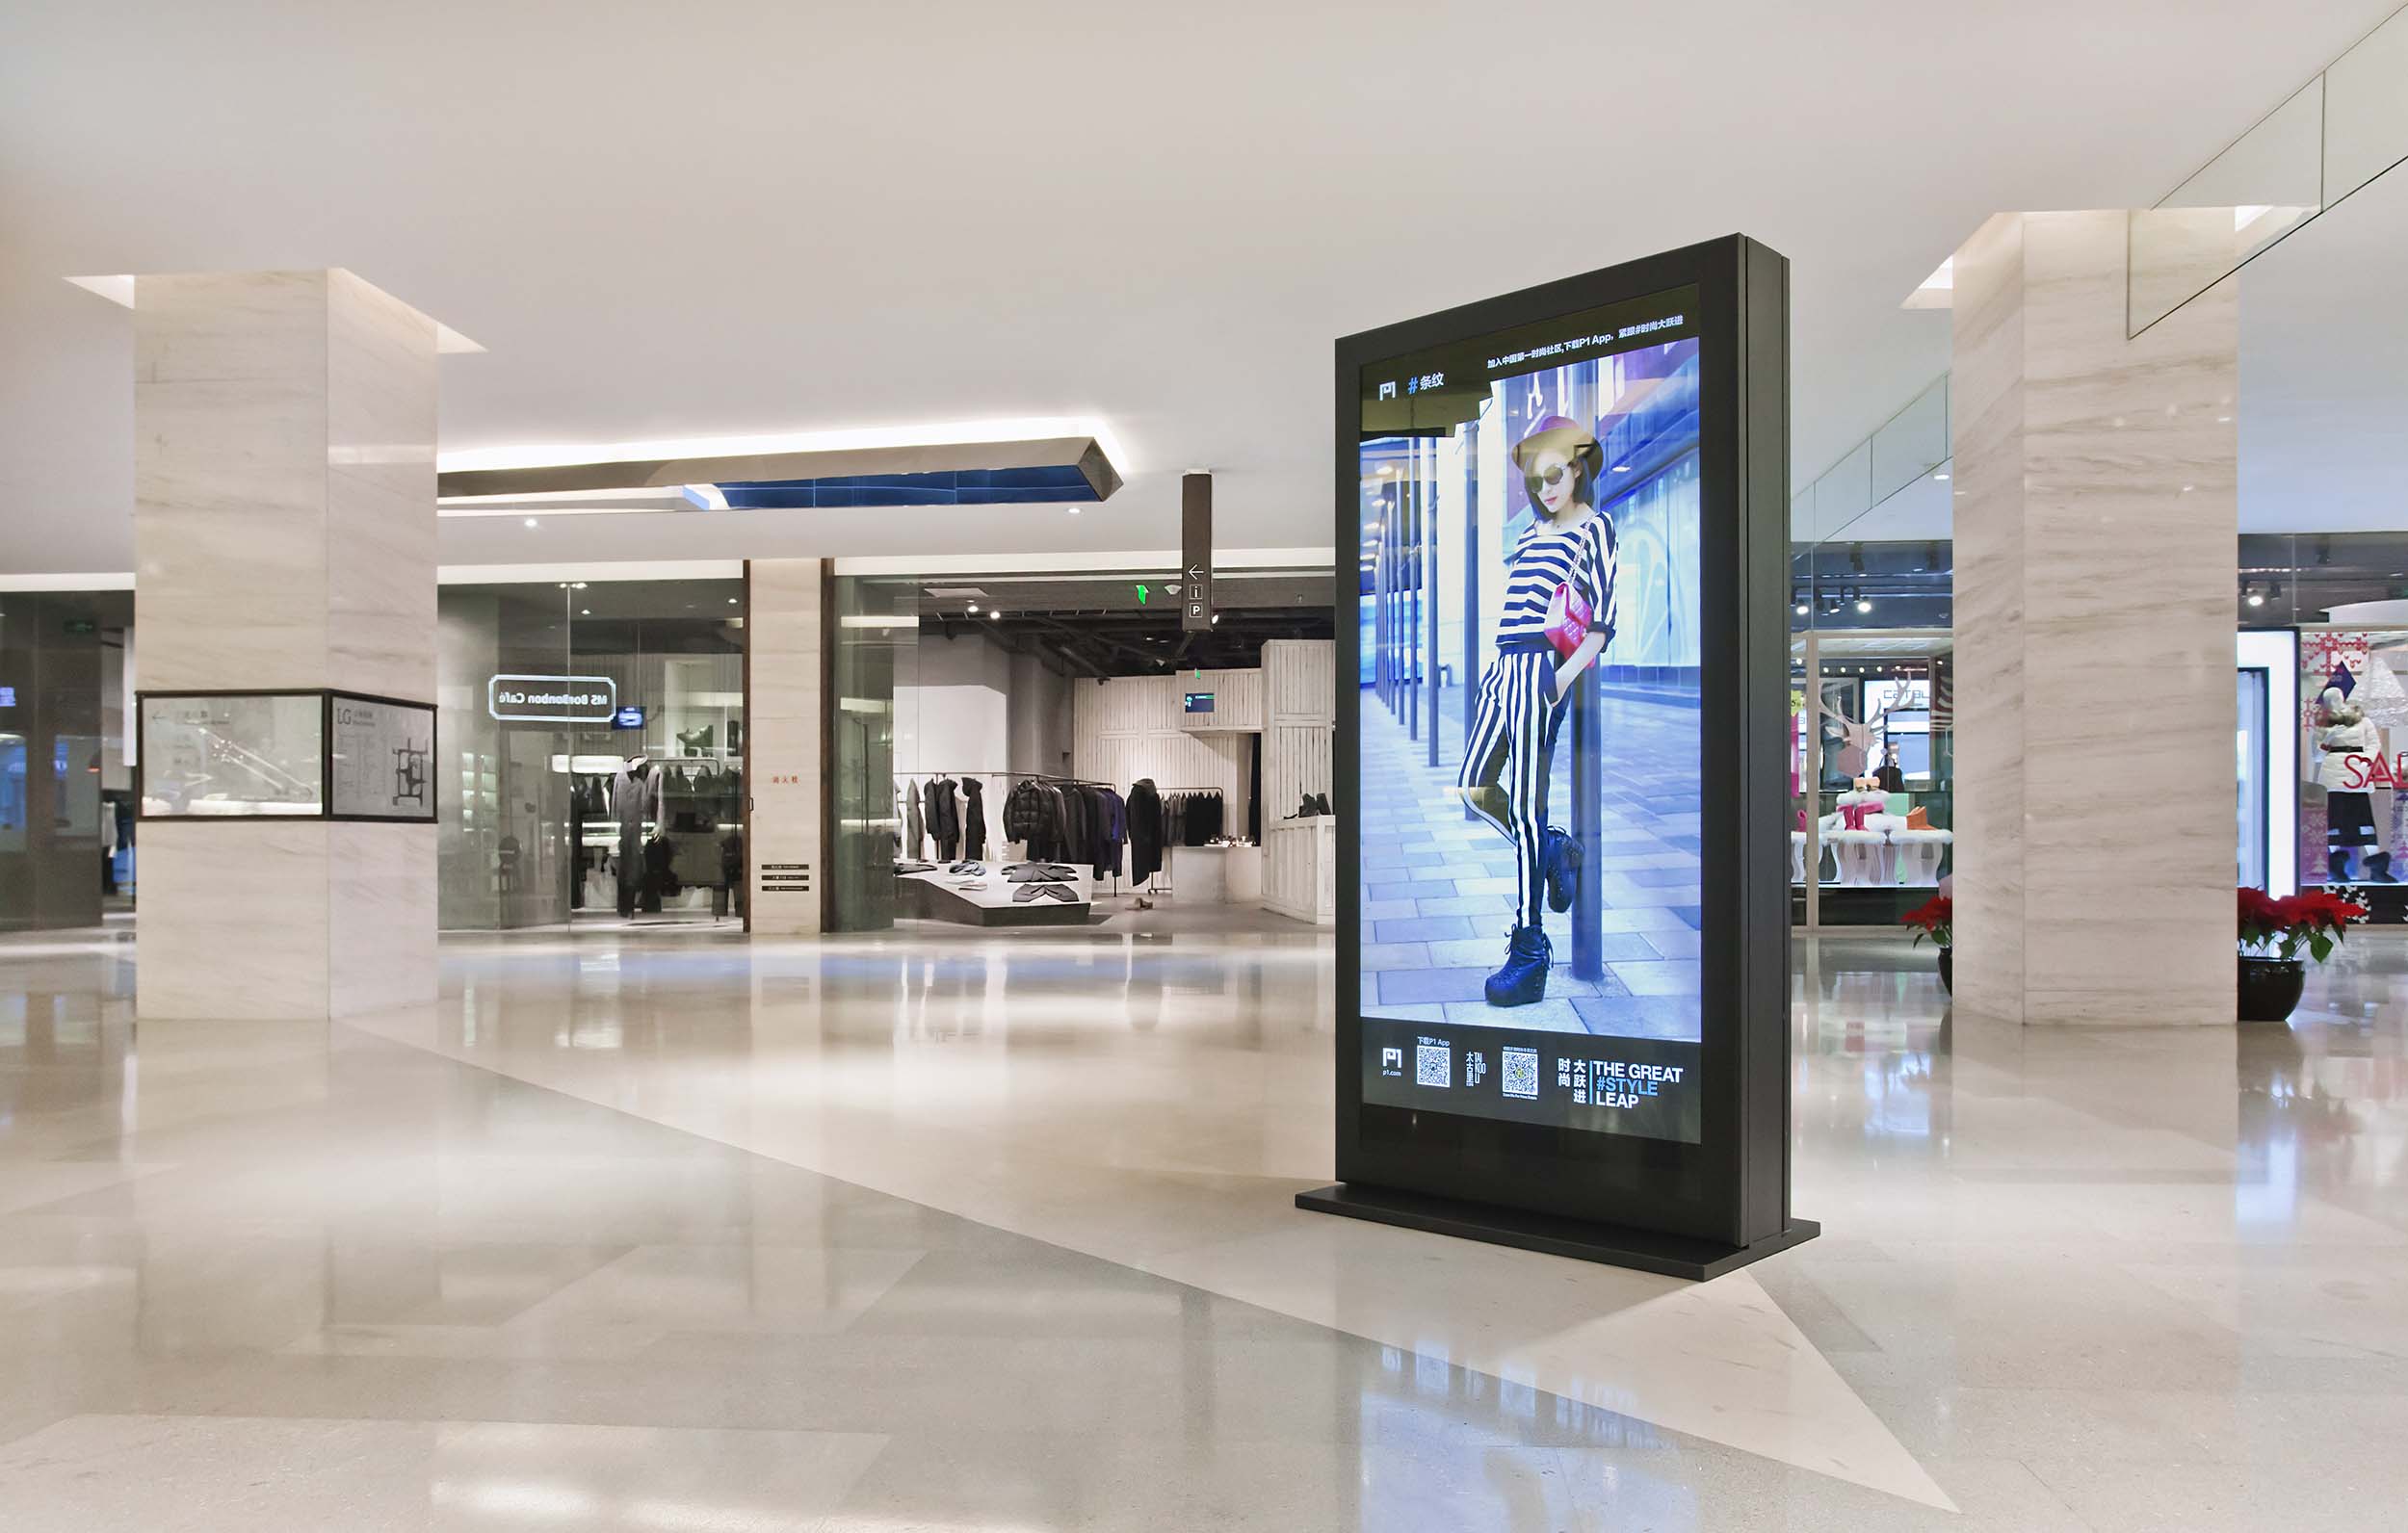 Integrated digital signage helps retail resurgence|Kodum-digital-signage-hero|Kodum-digital-signage-01|Kodum-digital-signage-02|Integrated digital signage helps retail resurgence